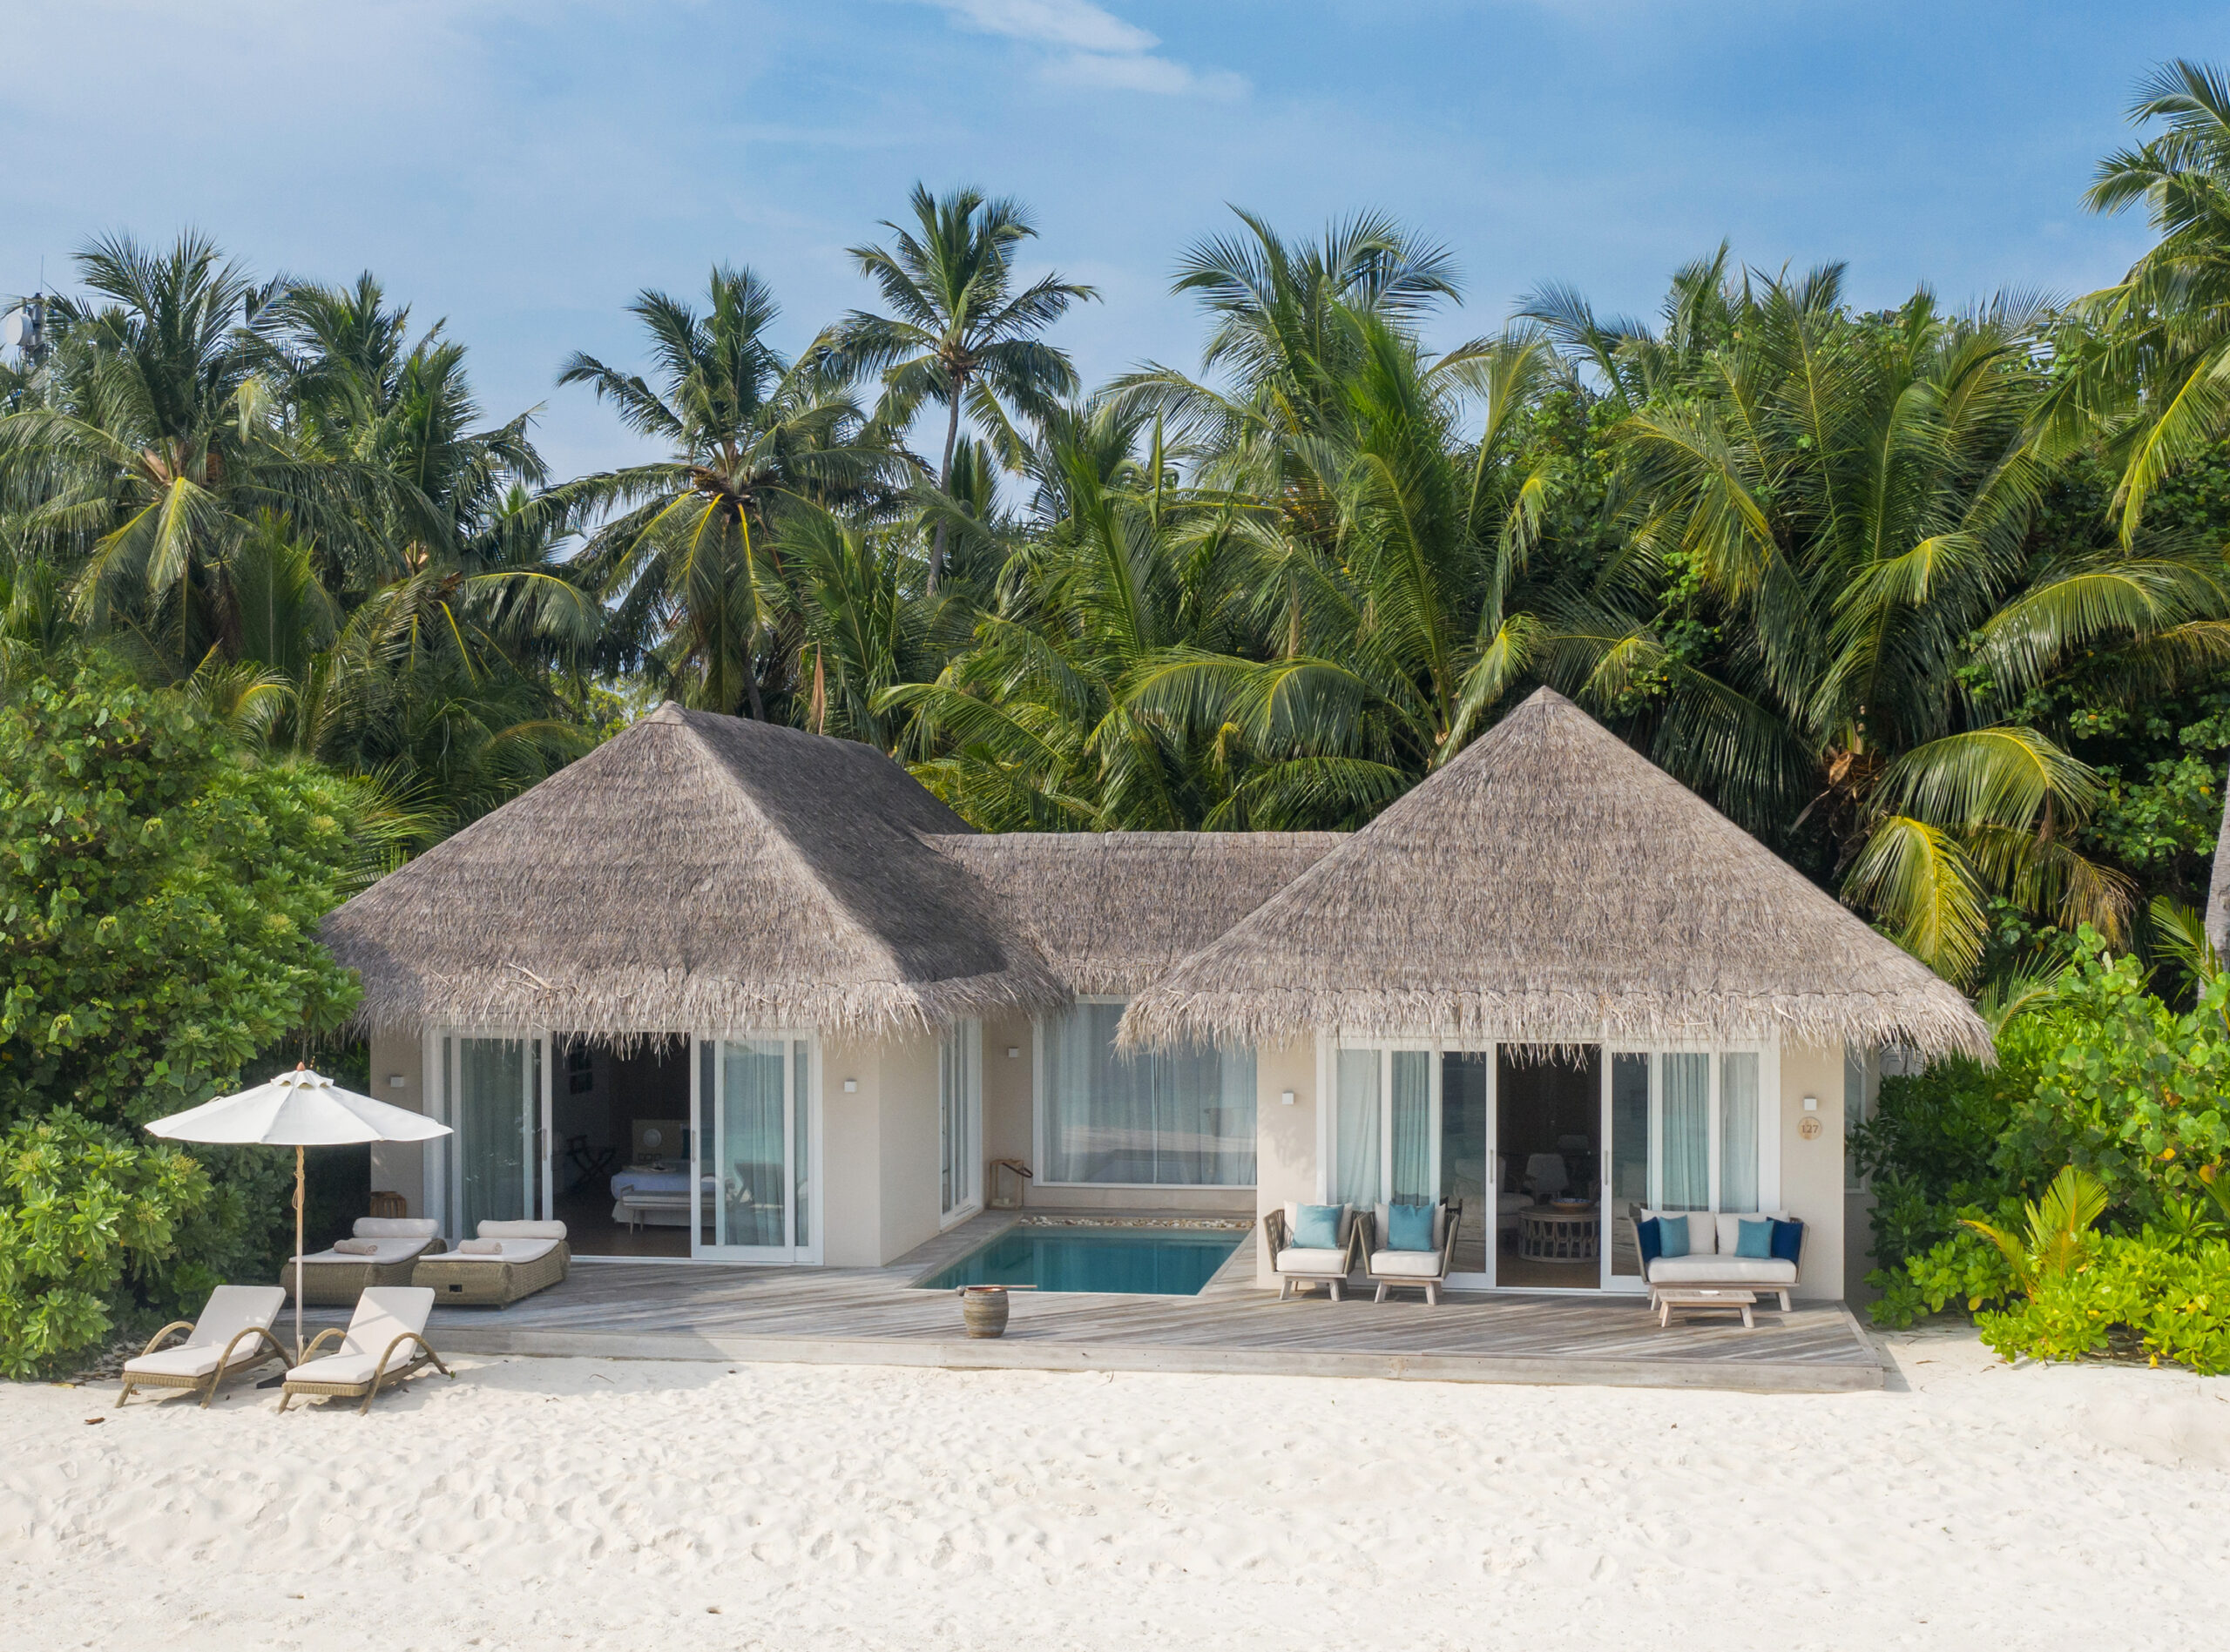 Baglioni_Resort_Maldives_Deluxe_Beach_Suite_with_pool_Frontal_Exterior